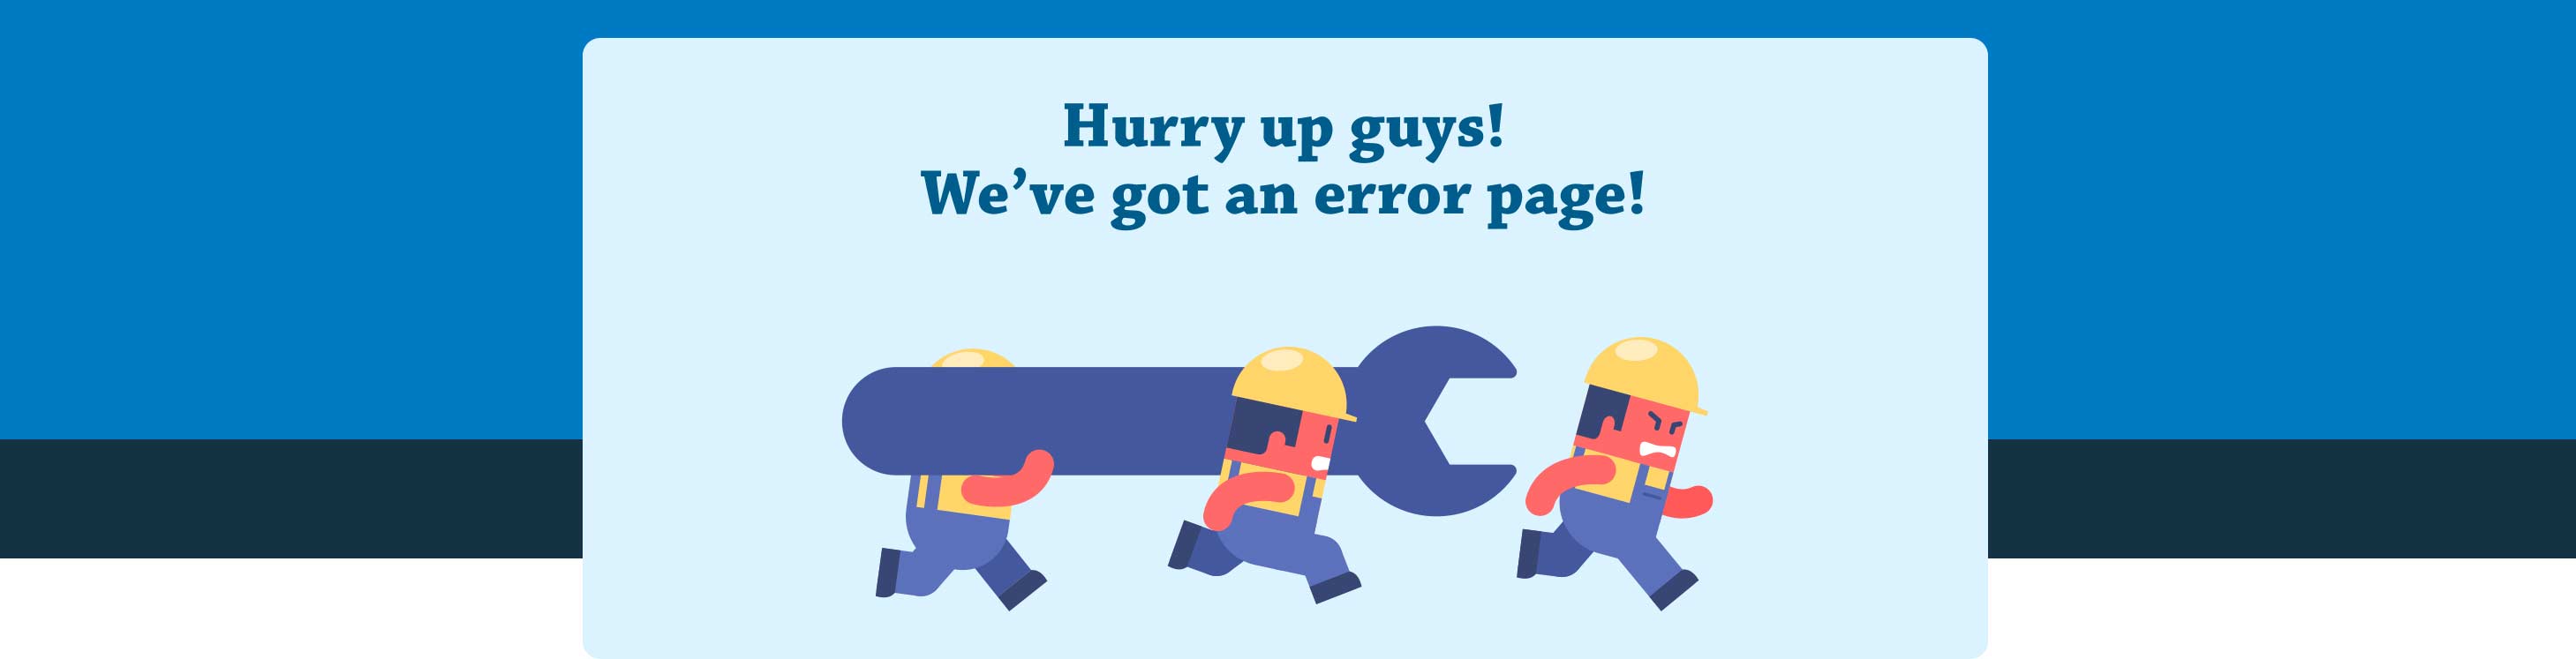 Hurry Up Guys! We've Got an Error Page!